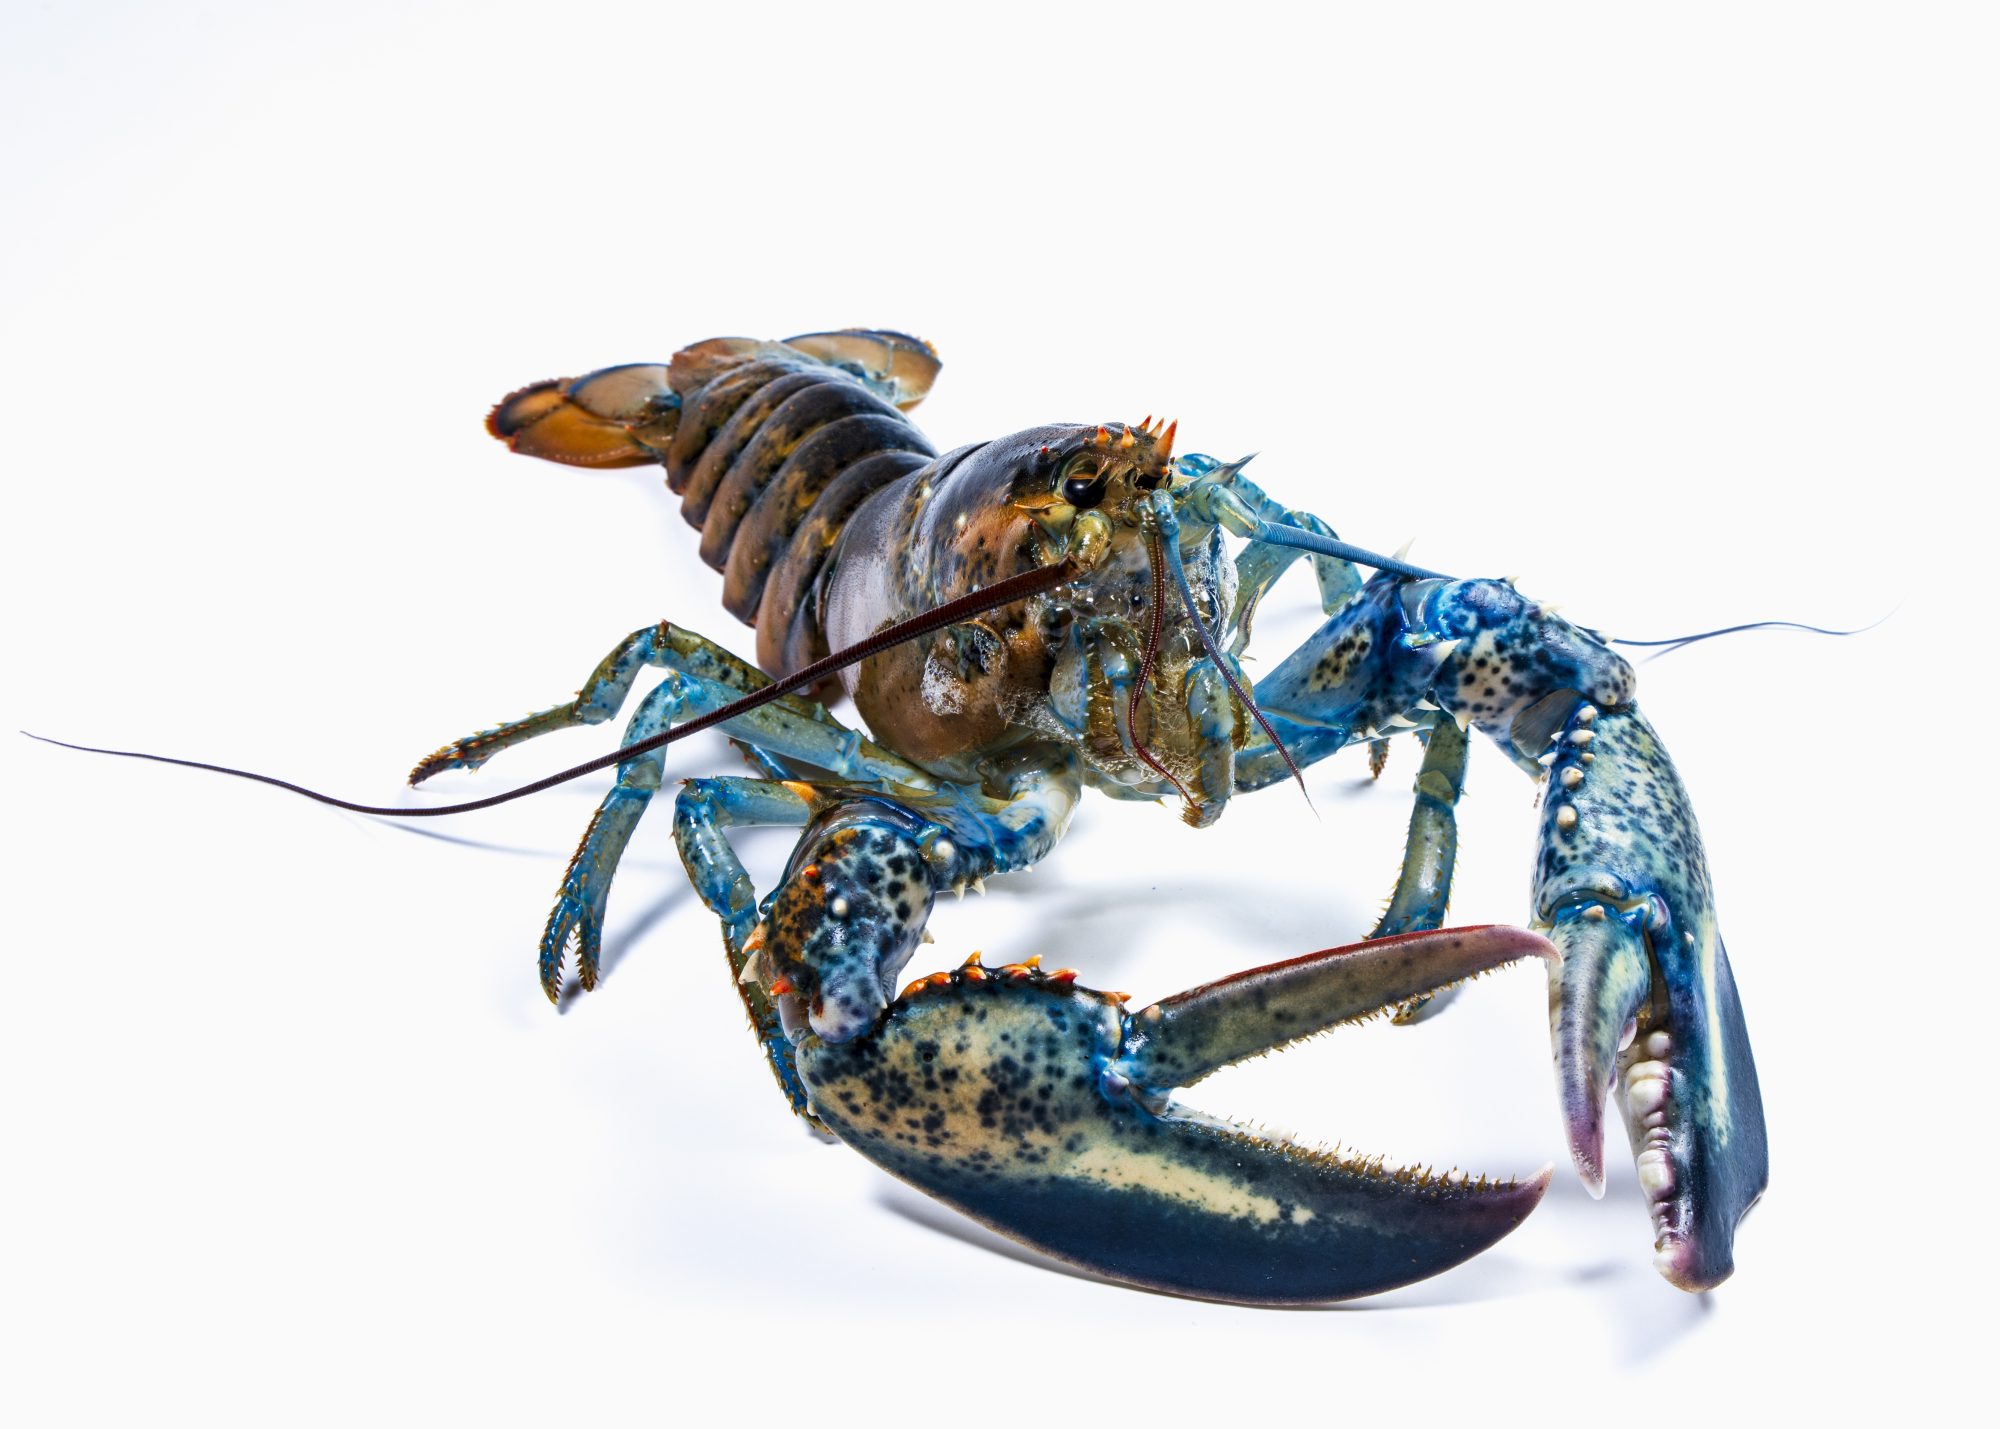 a photo of a lobster named Currant, a split blue lobster